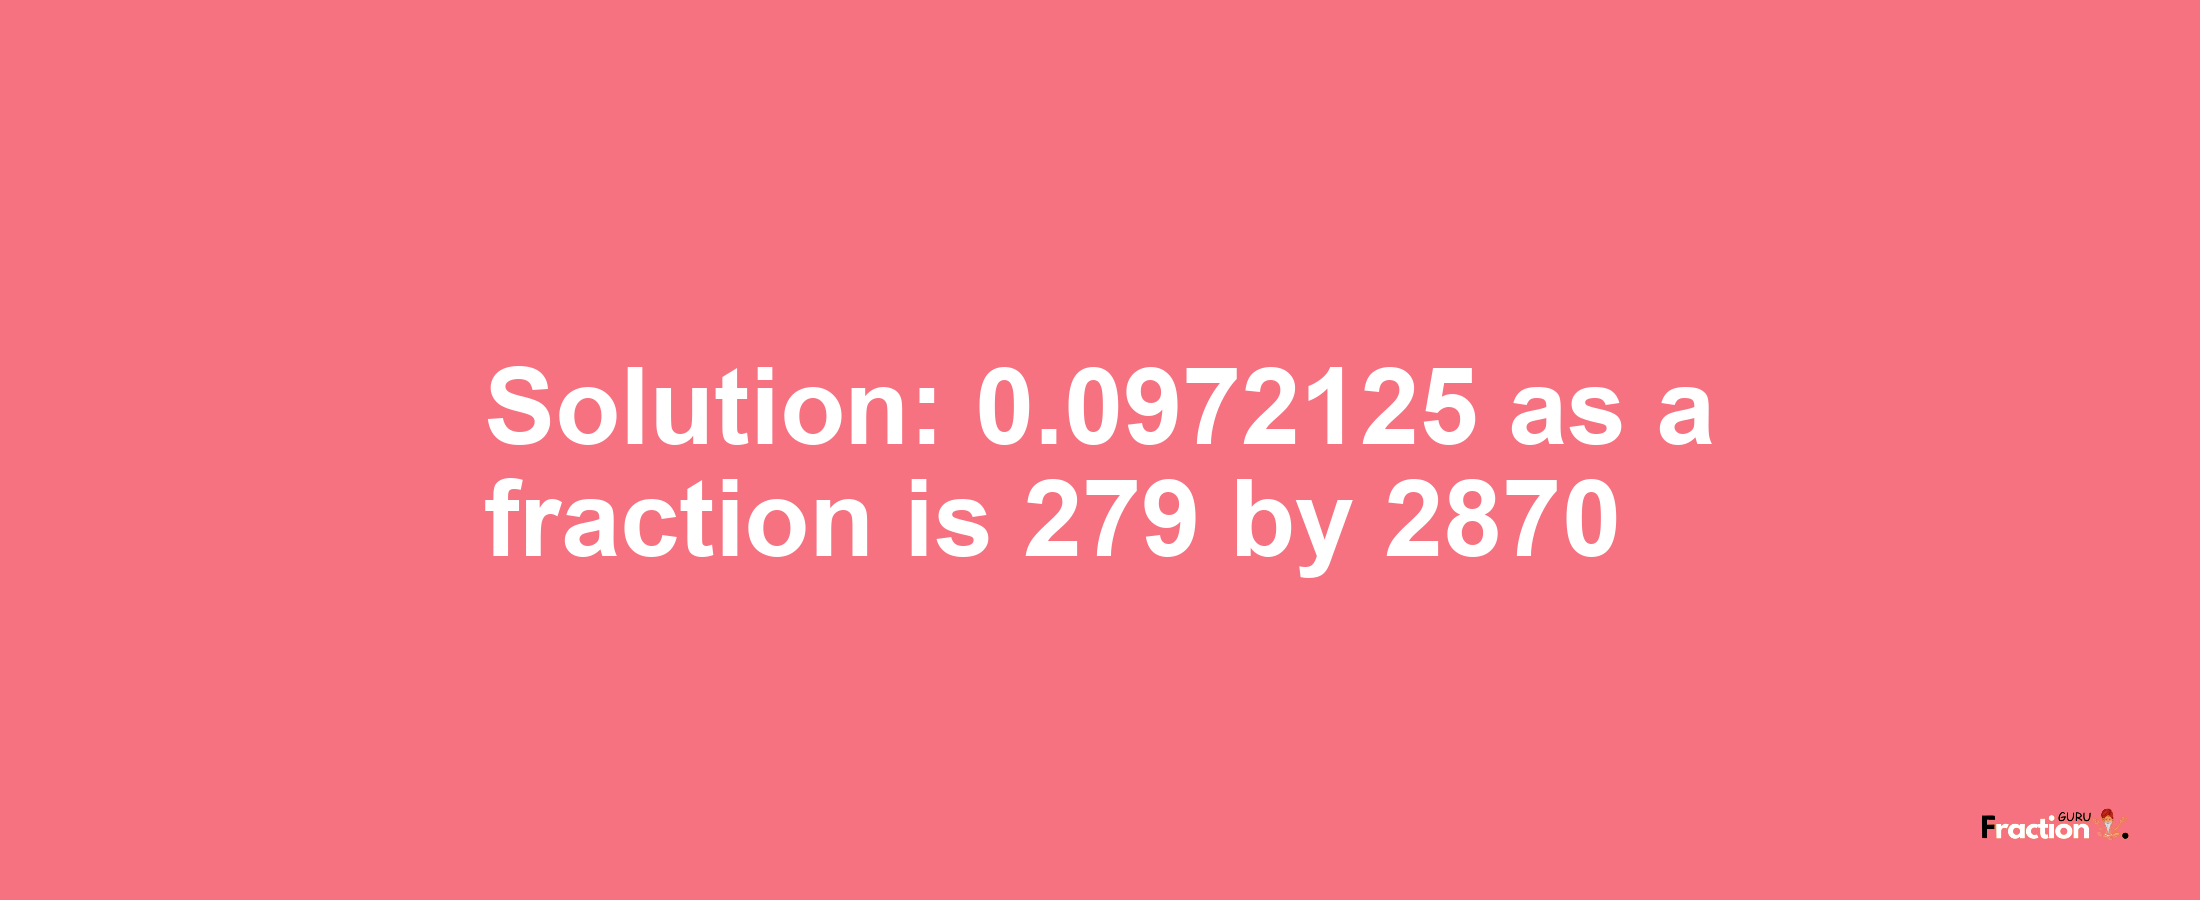 Solution:0.0972125 as a fraction is 279/2870